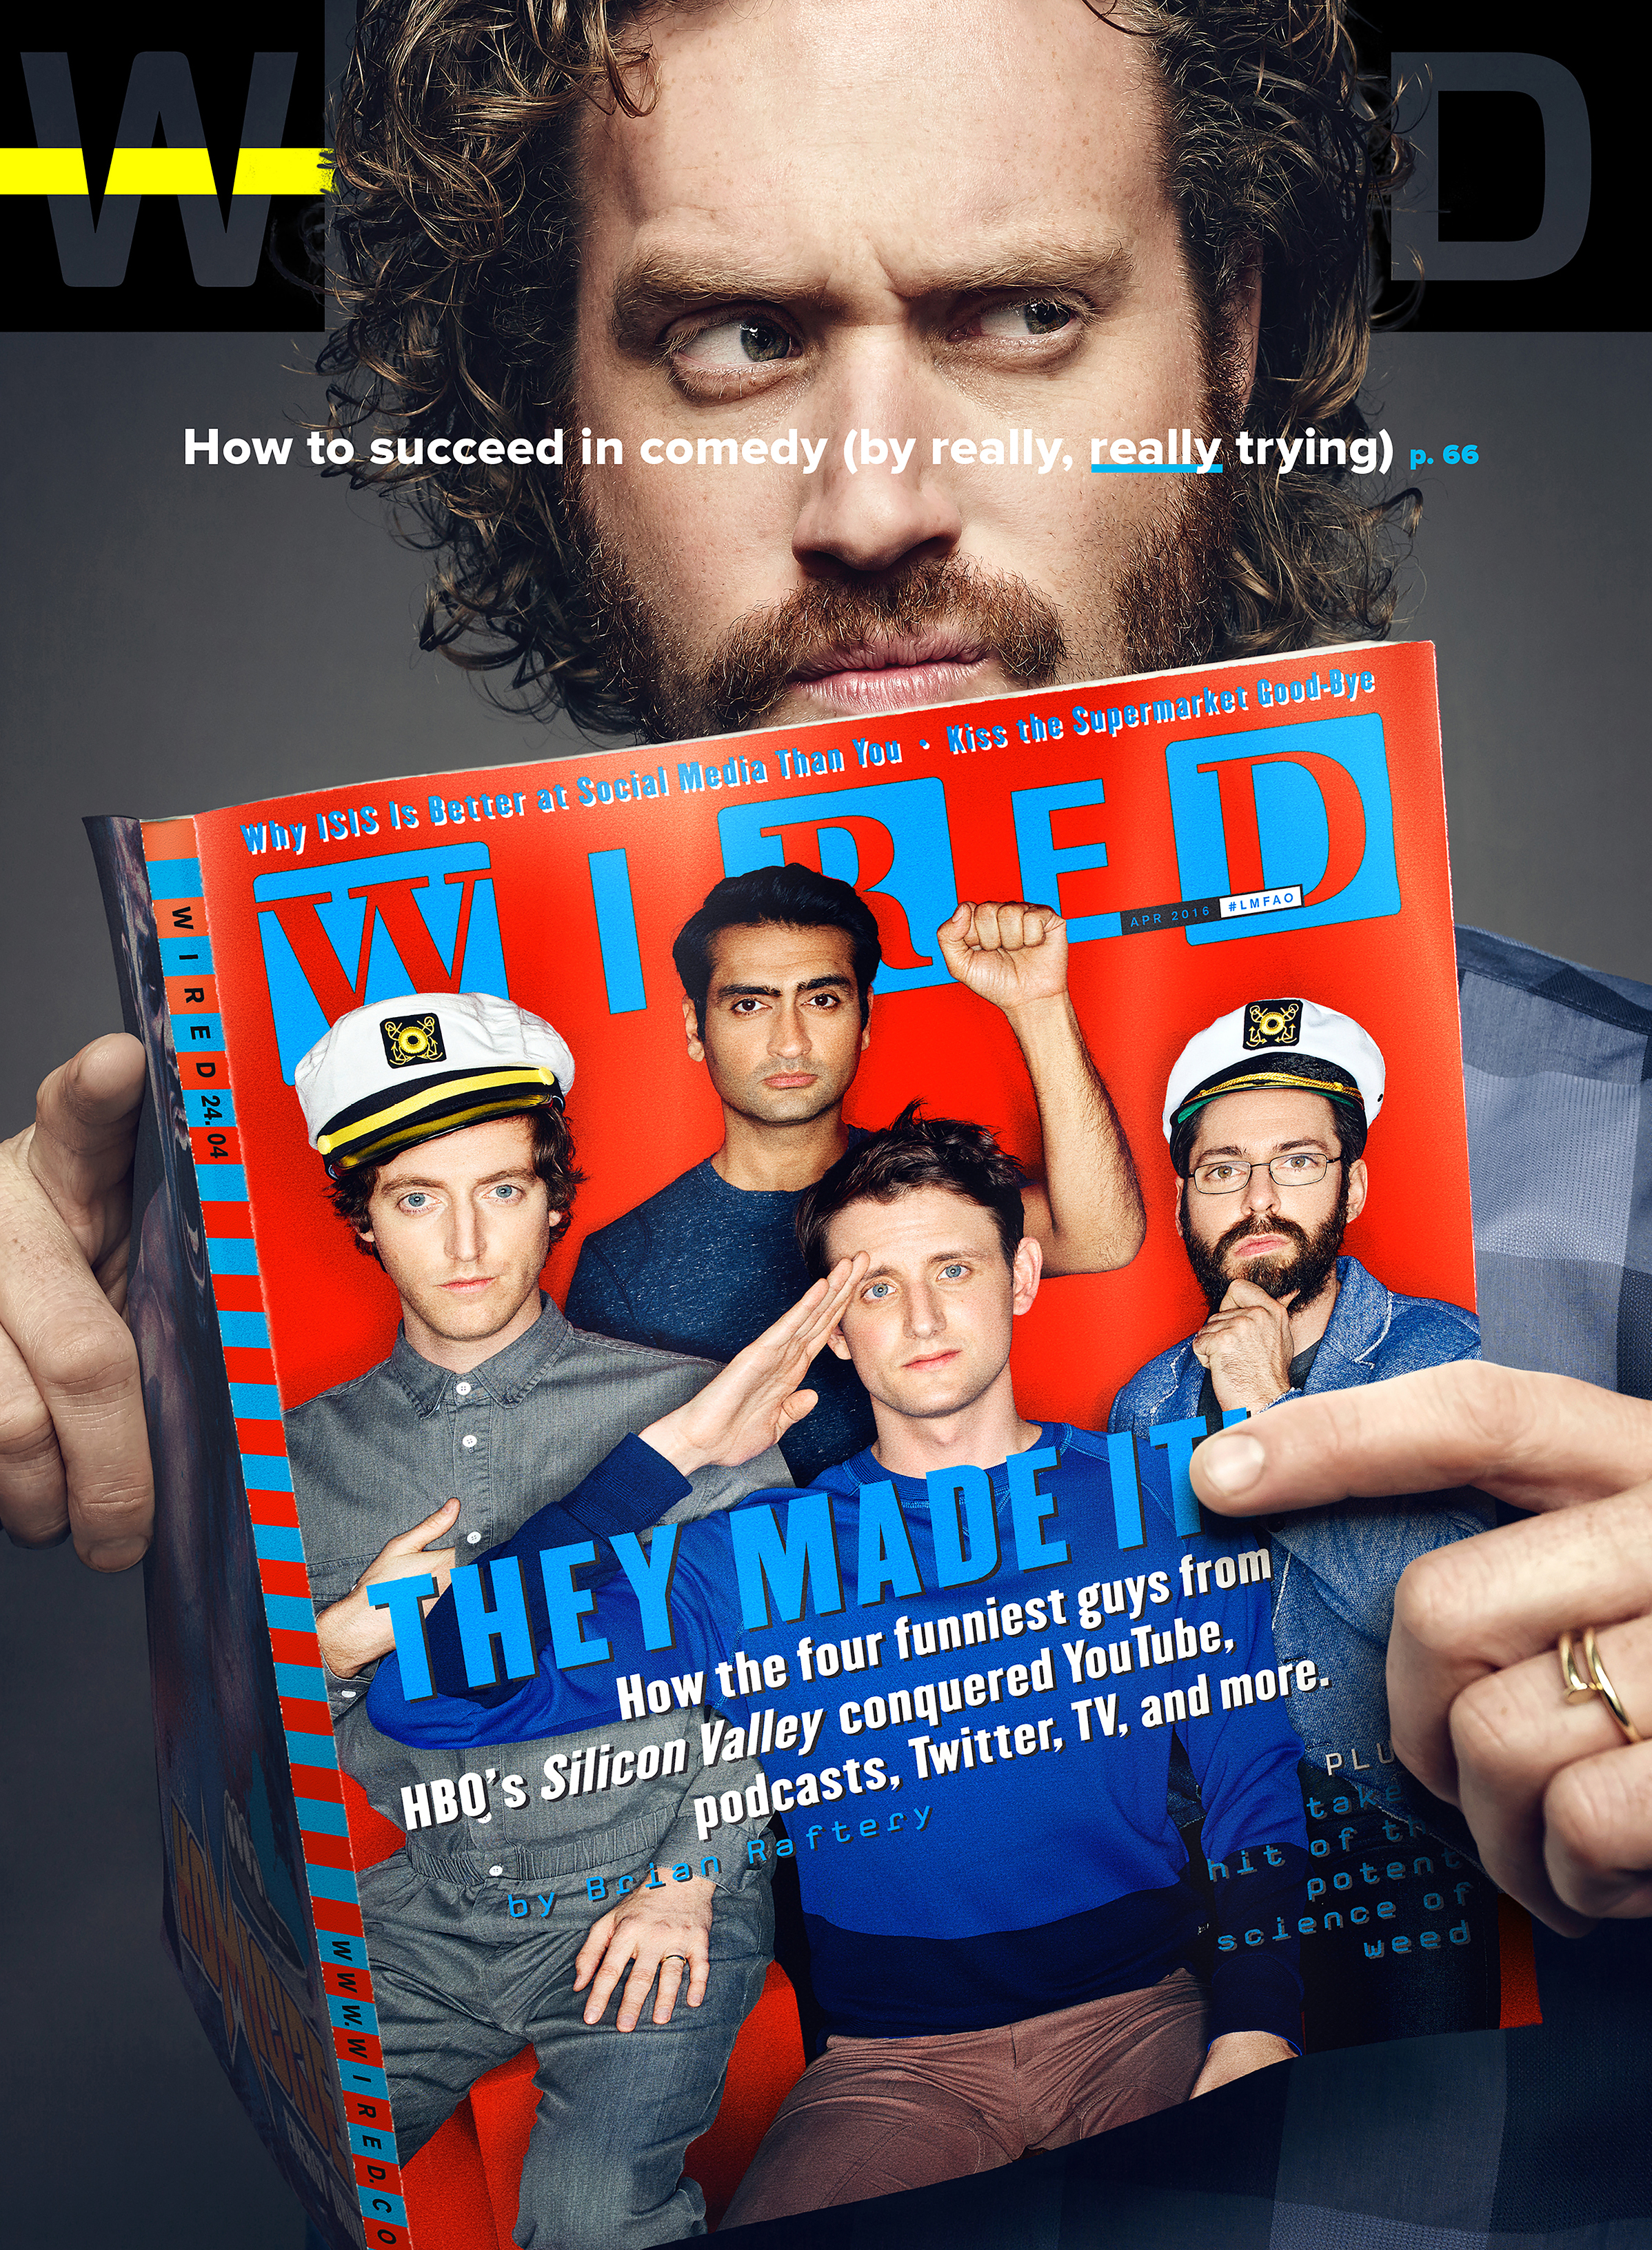 WIRED - "Silicon Valley," April split covers